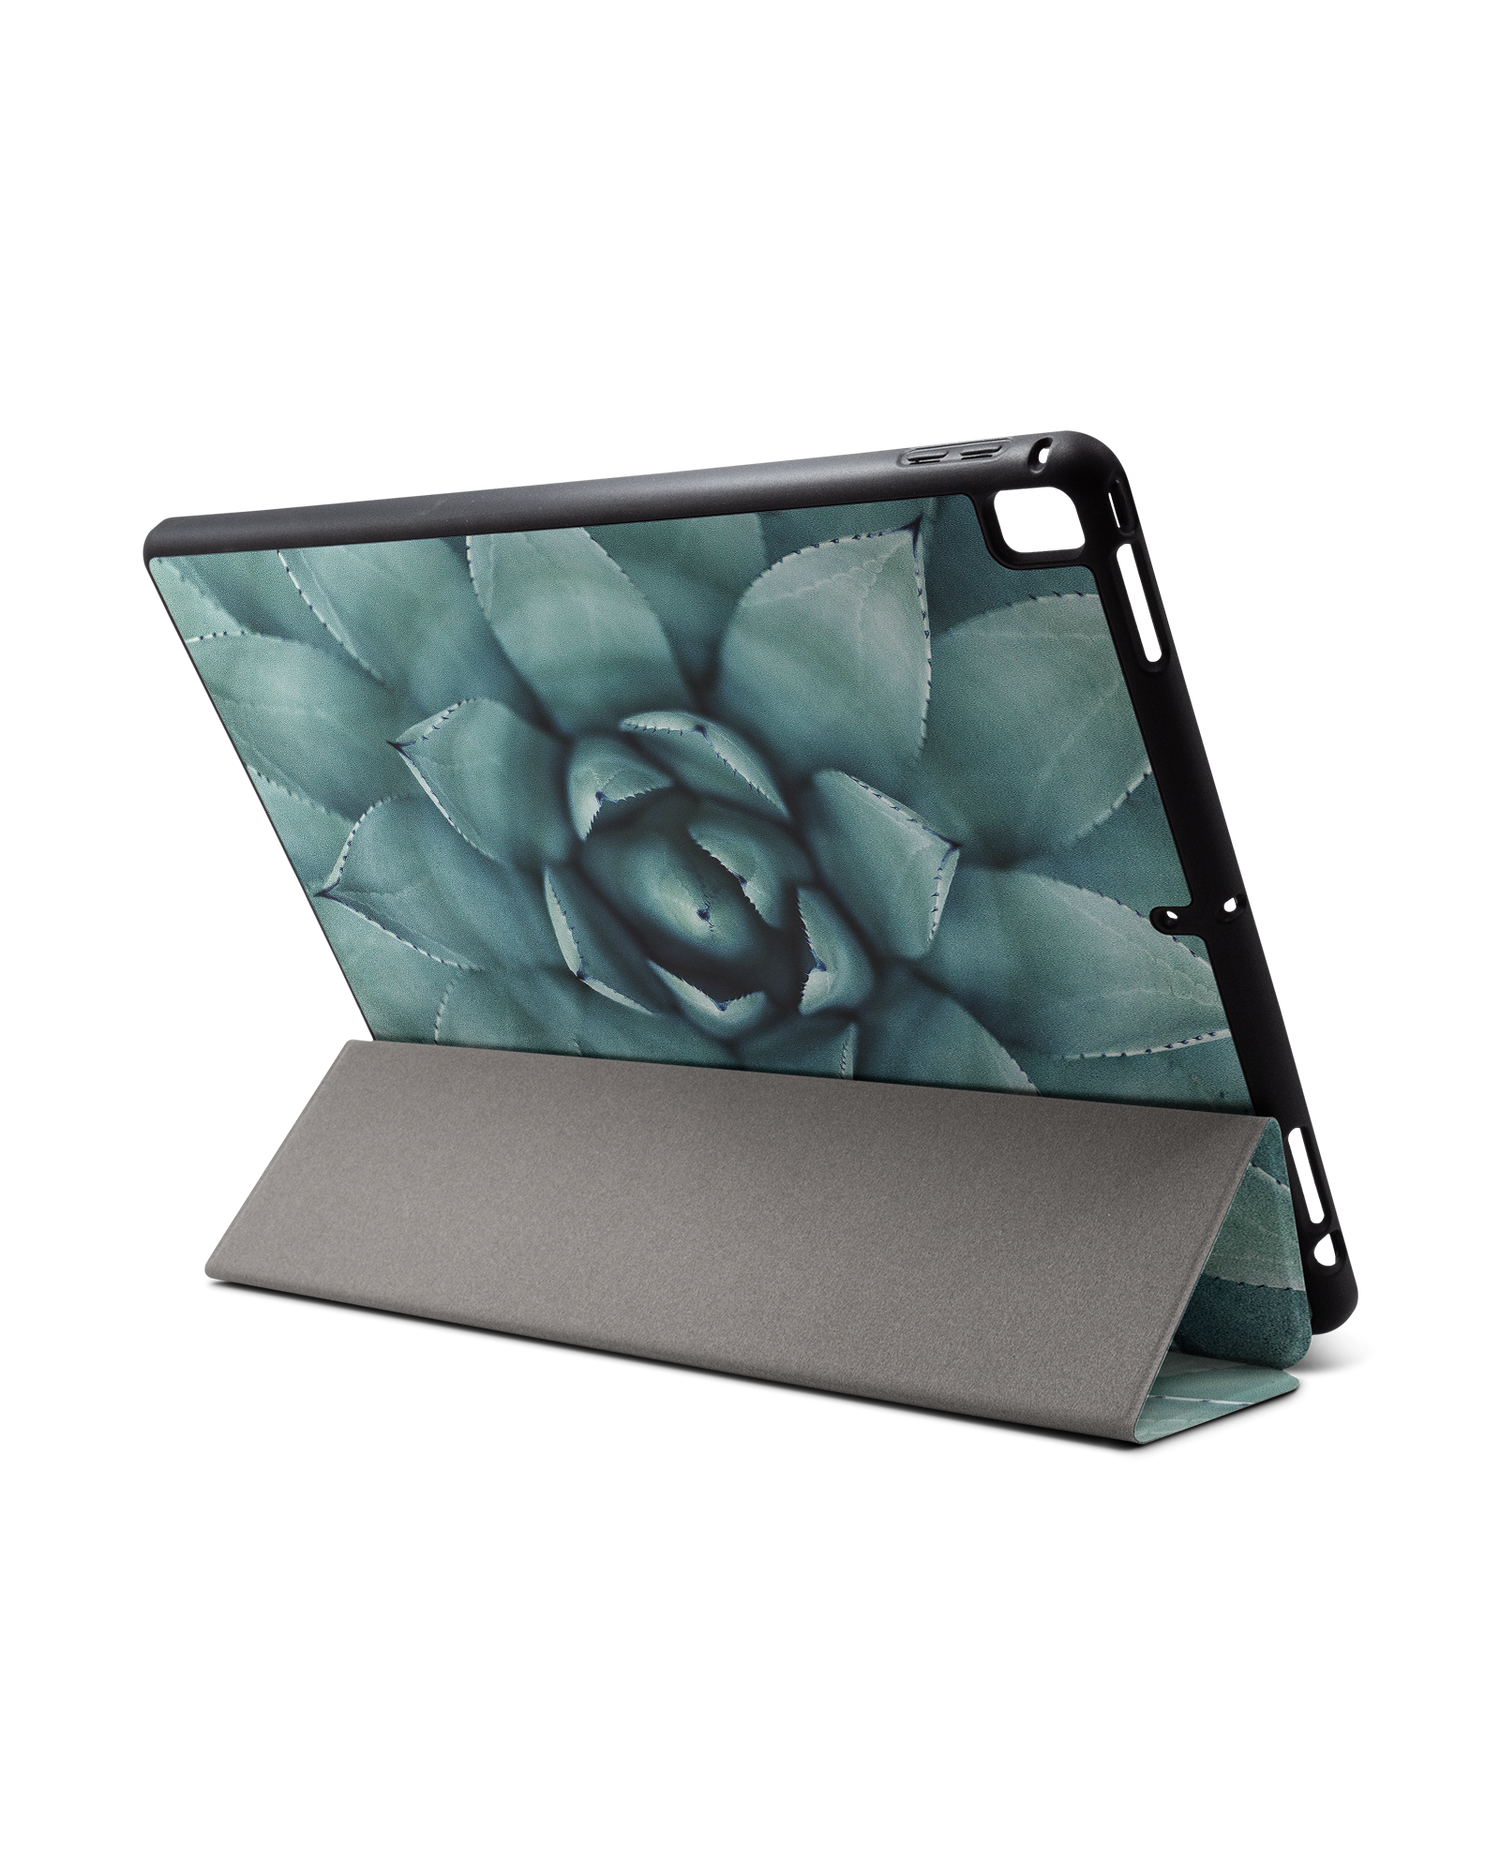 Beautiful Succulent iPad Case with Pencil Holder for Apple iPad Pro 2 12.9